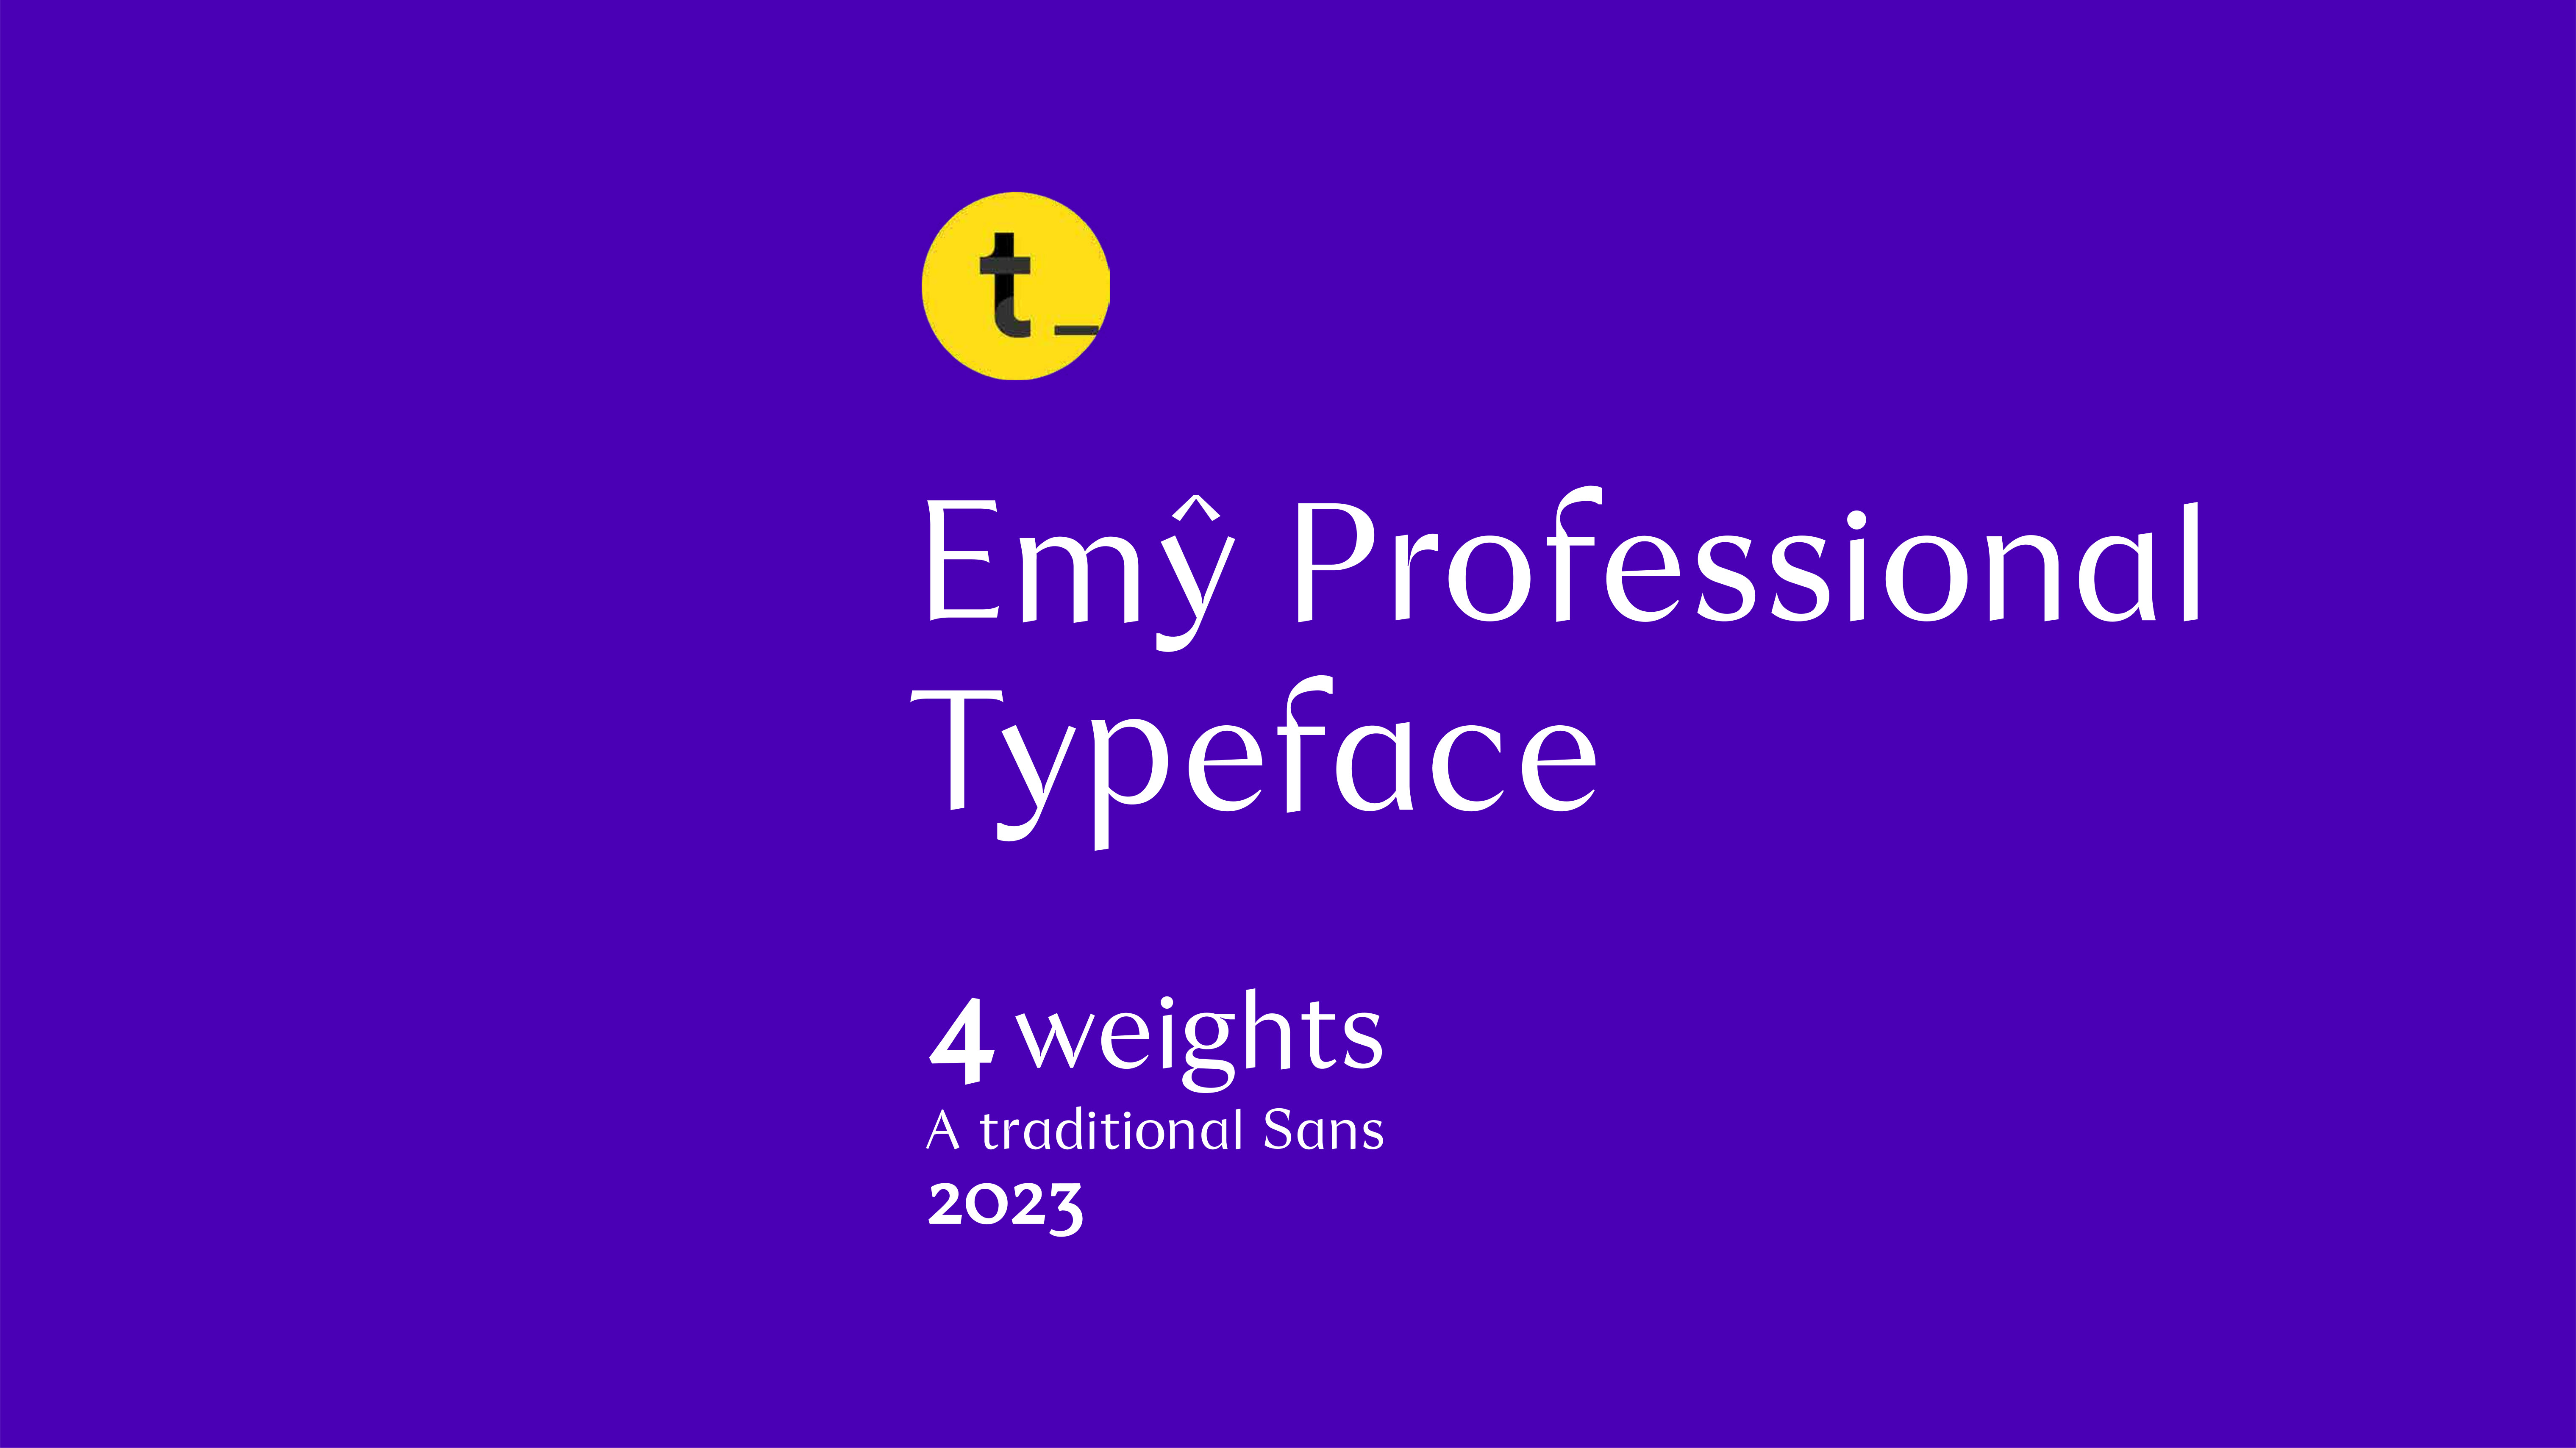 Emy Professional Typeface 2023 rendition image